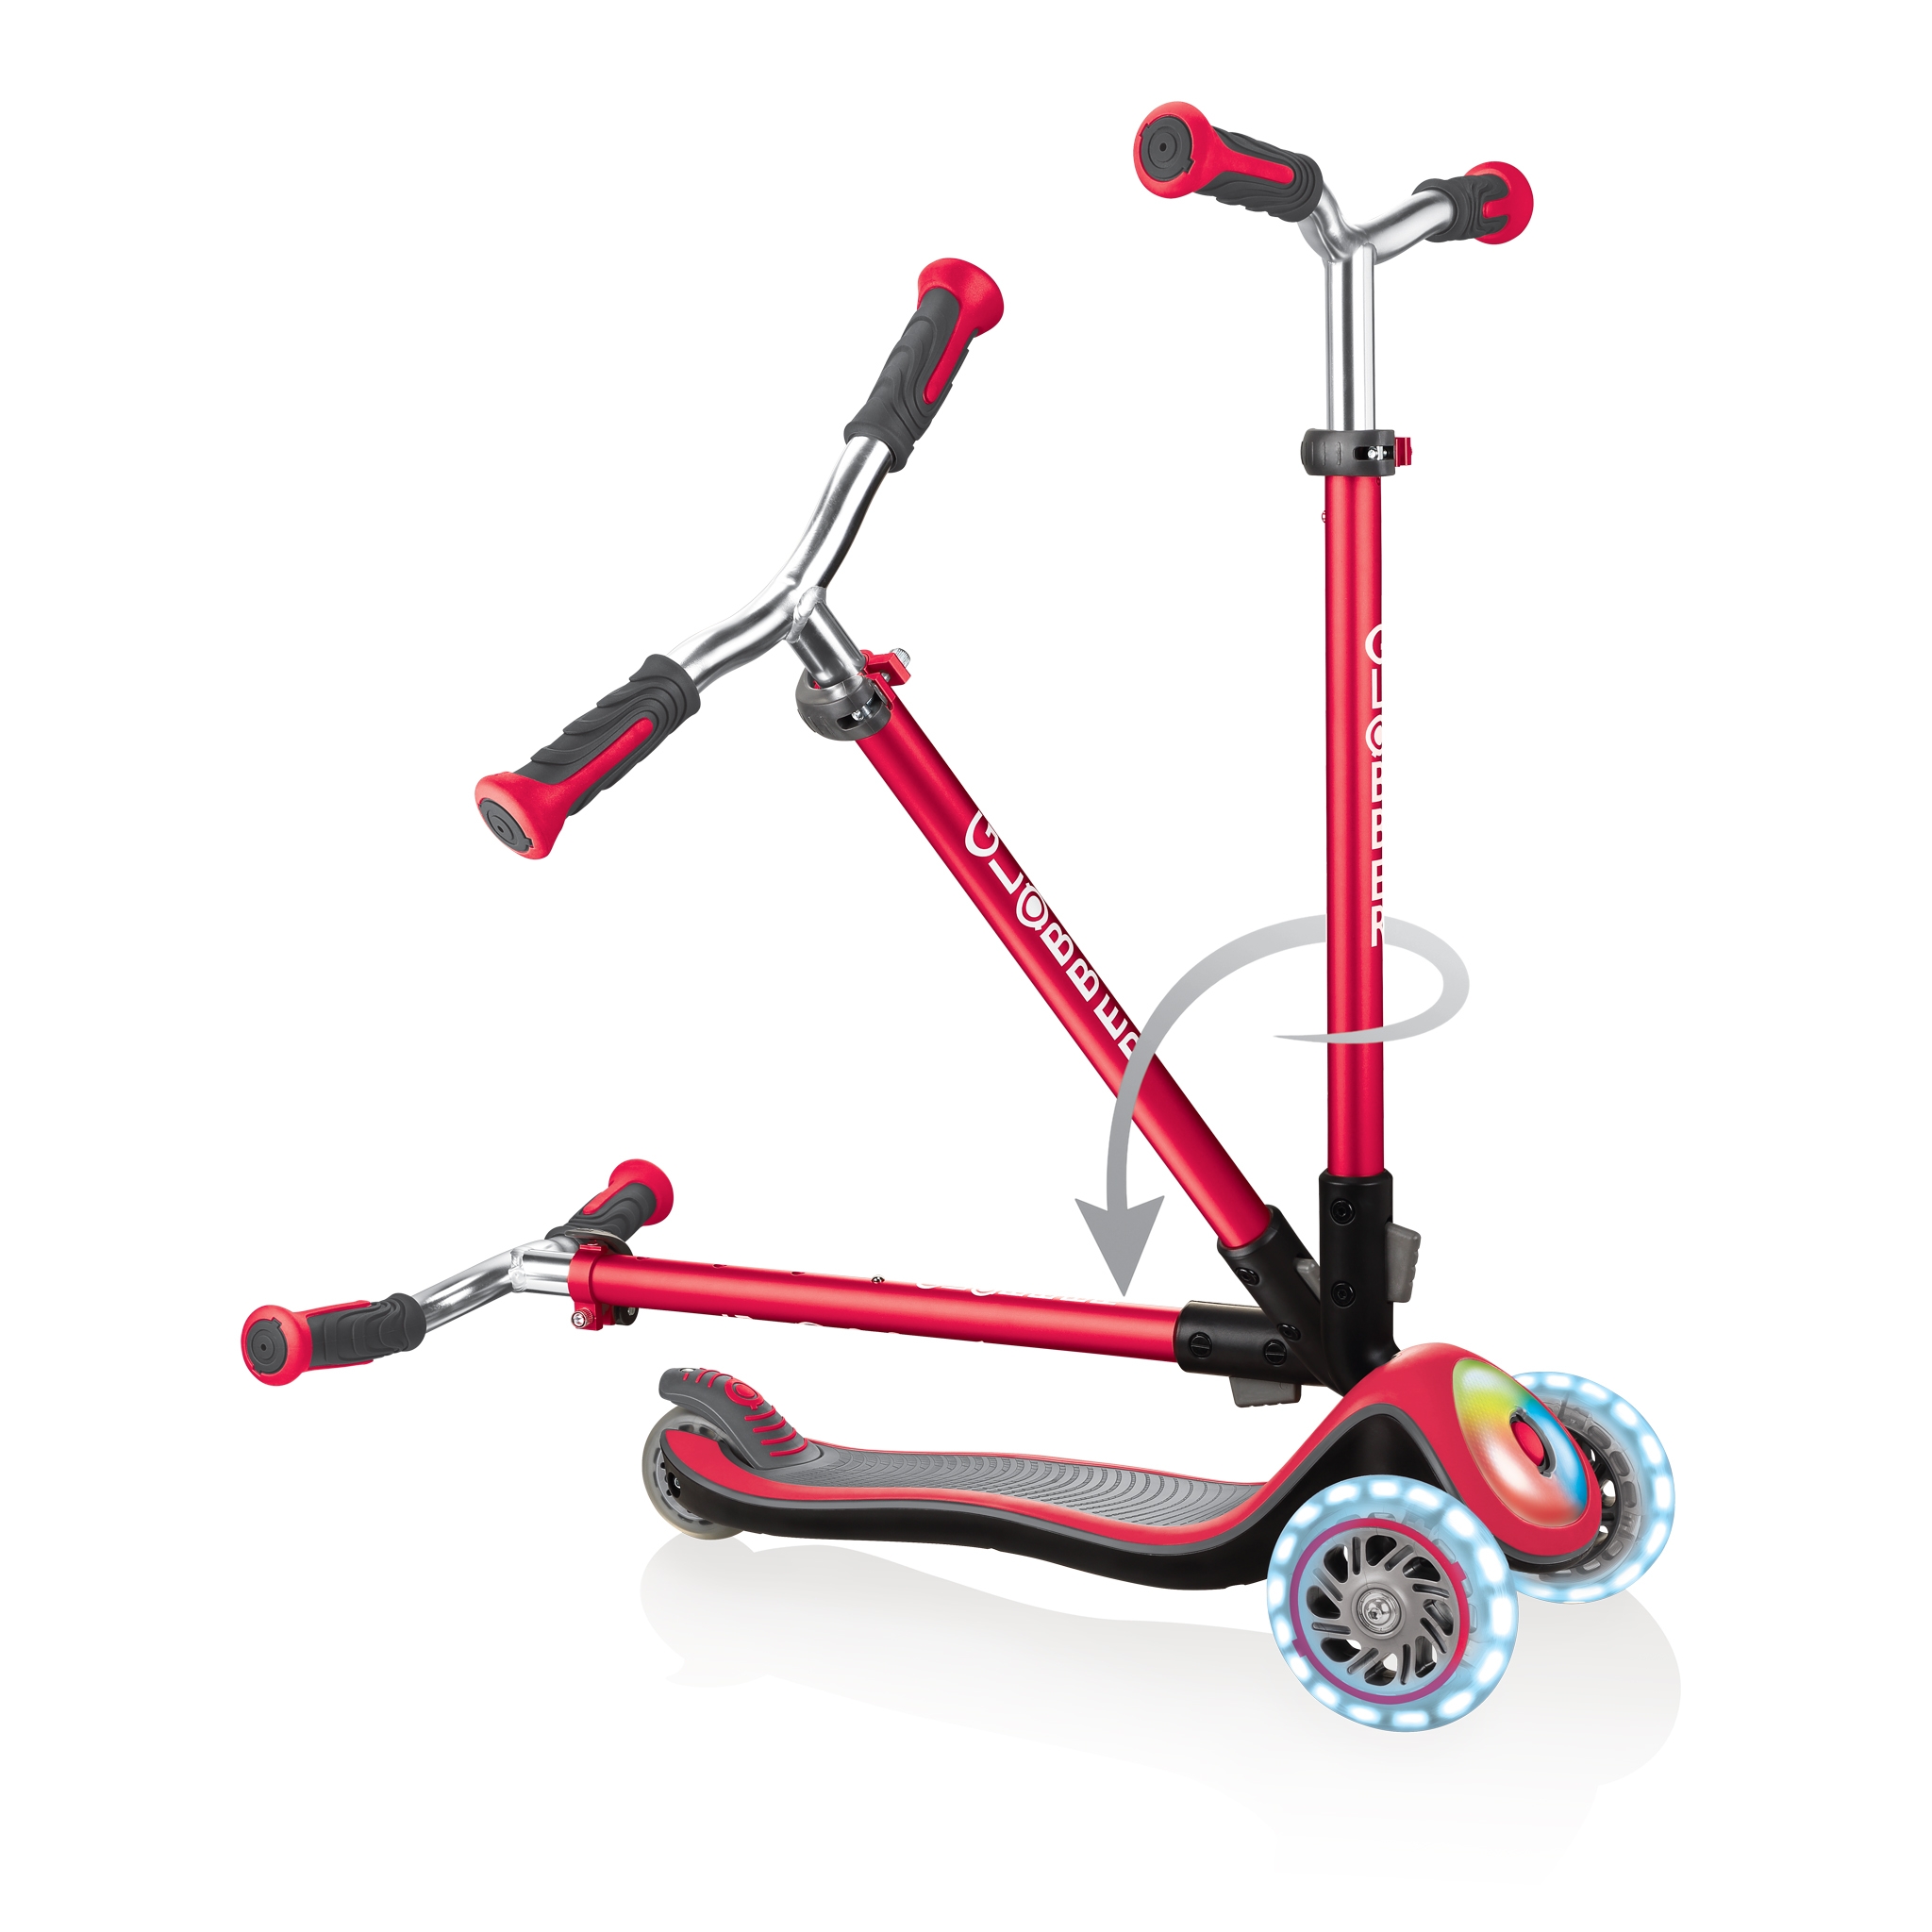 Globber-ELITE-PRIME-best-3-wheel-scooter-for-kids-with-patented-folding-system-new-red 3